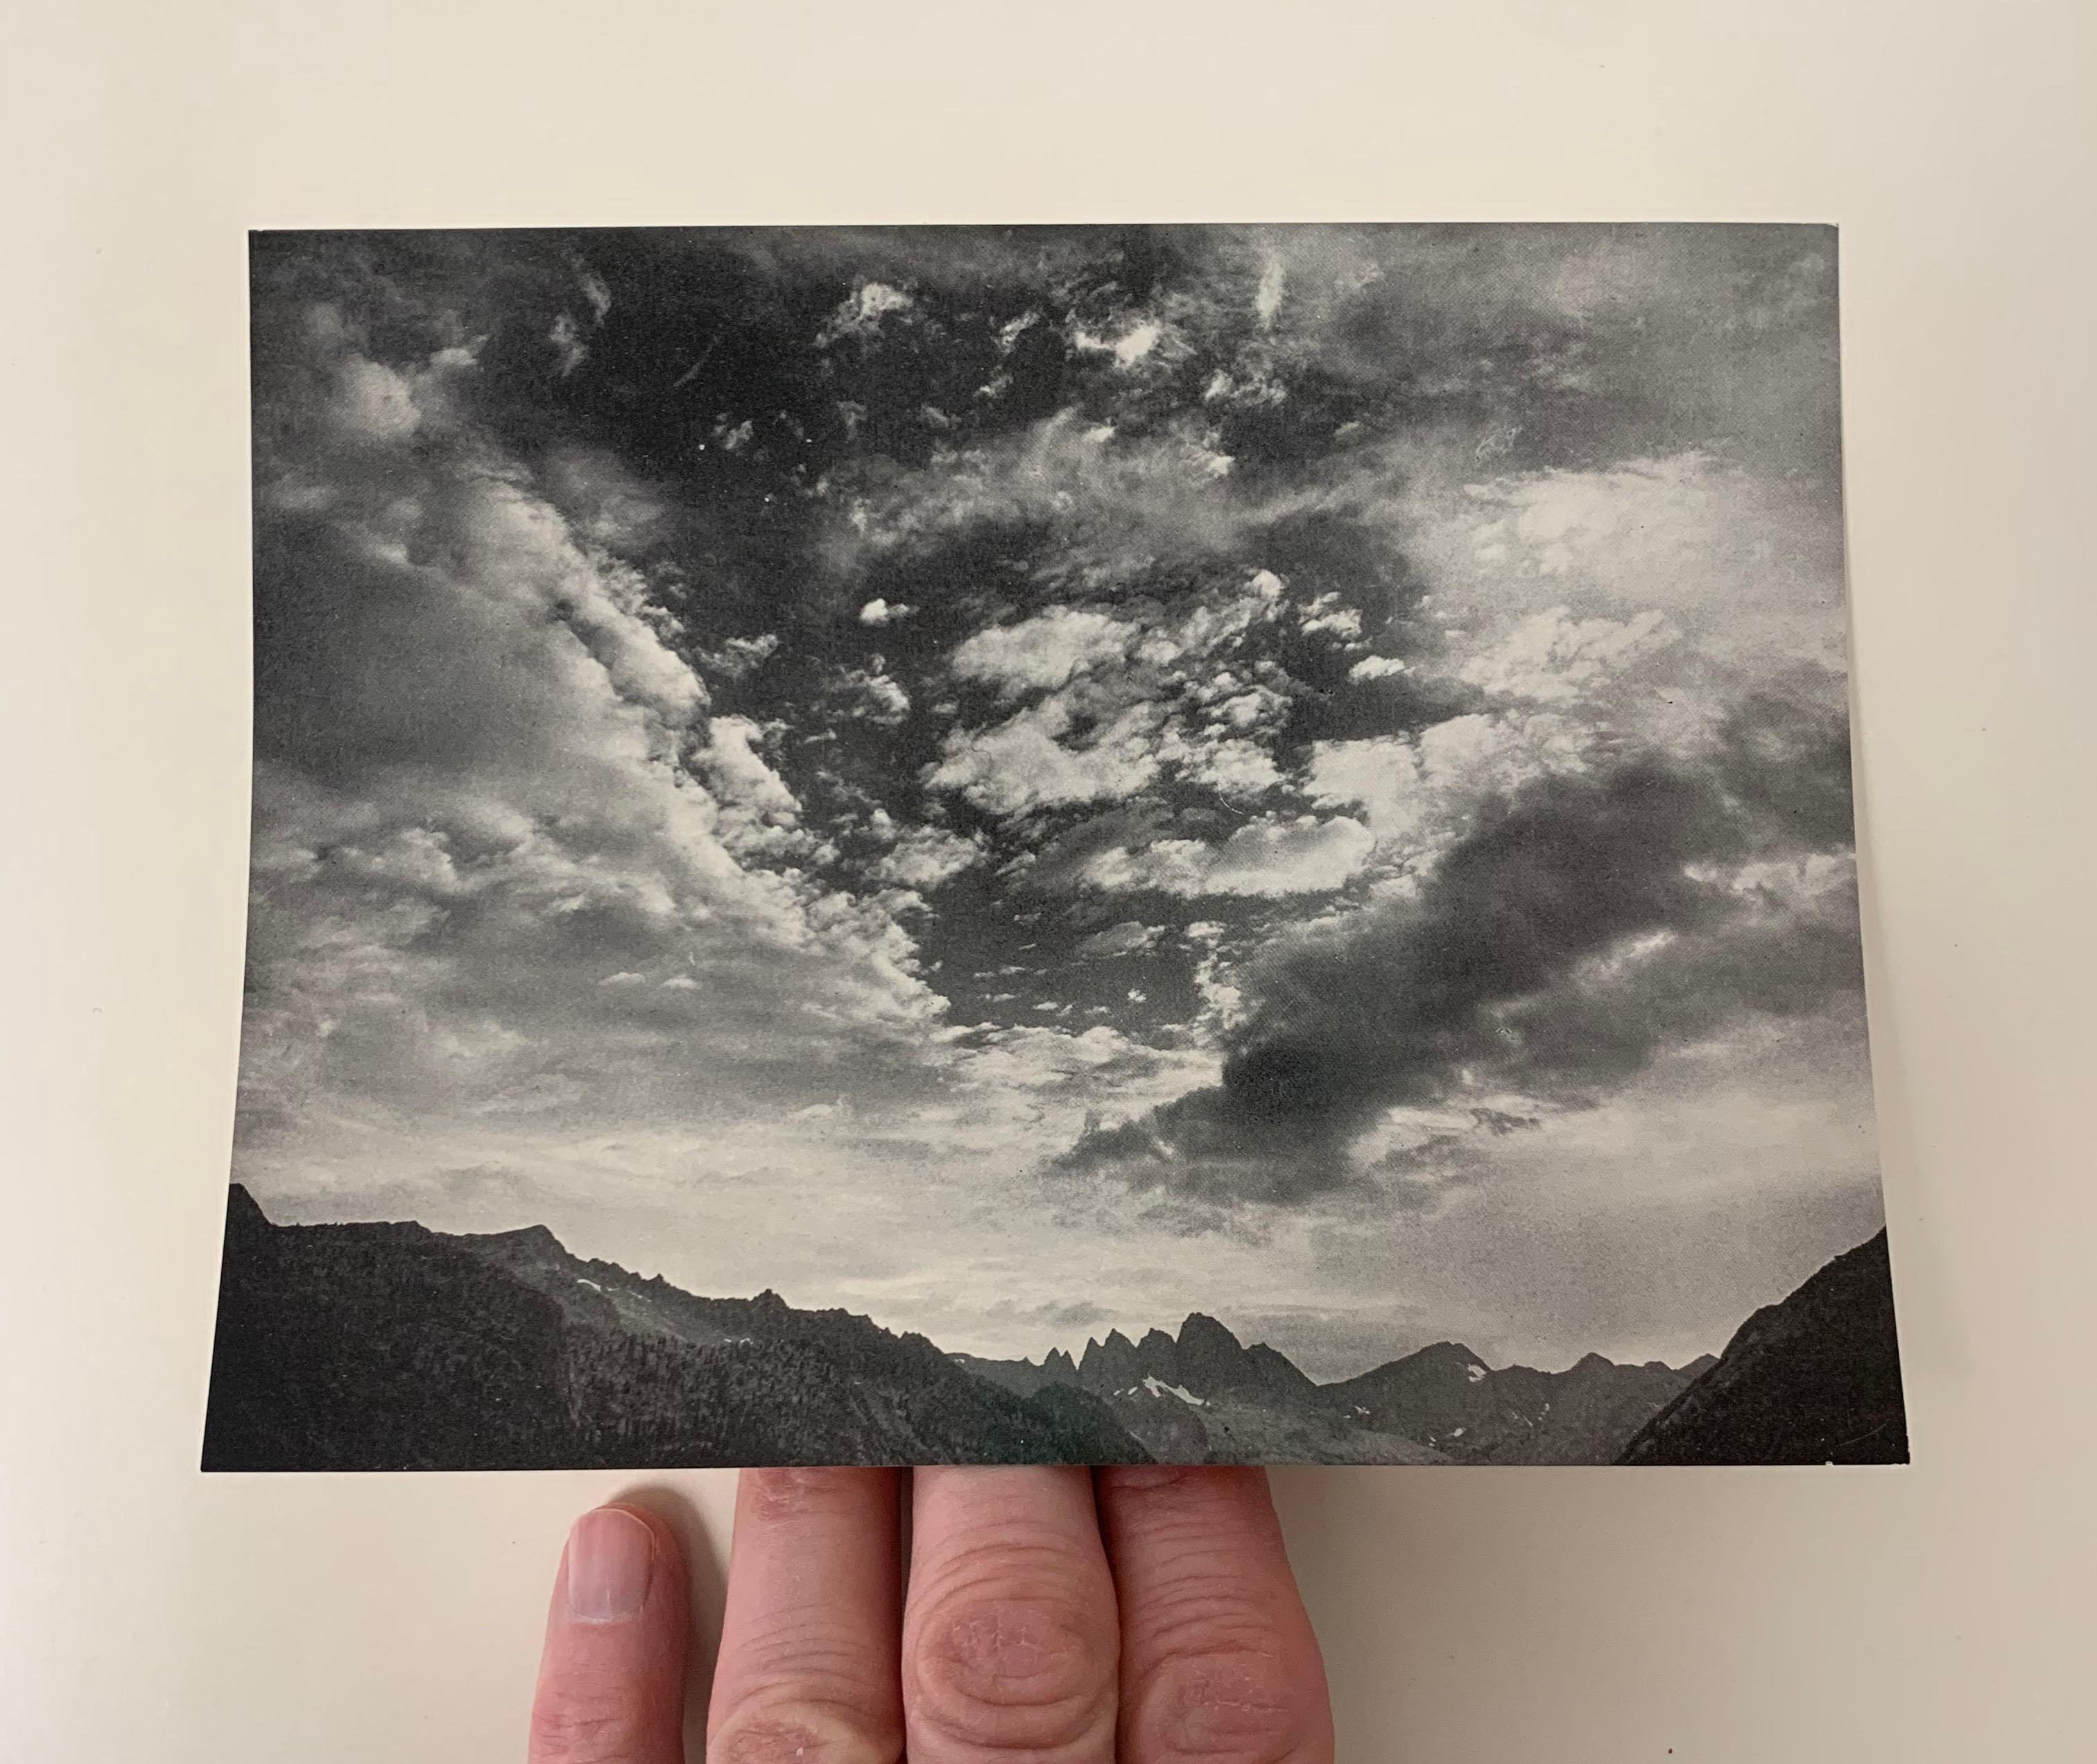 Artist	Ansel Adams
Style	Contemporary
Creation Year	1939
Period	1930-1939
Medium	Photographic Paper
Category	Black and White Photography
Handling Time    7-10 business days
Length	7
Width	5.375
Condition	Very Good

Devils Crags from Palisade Creek